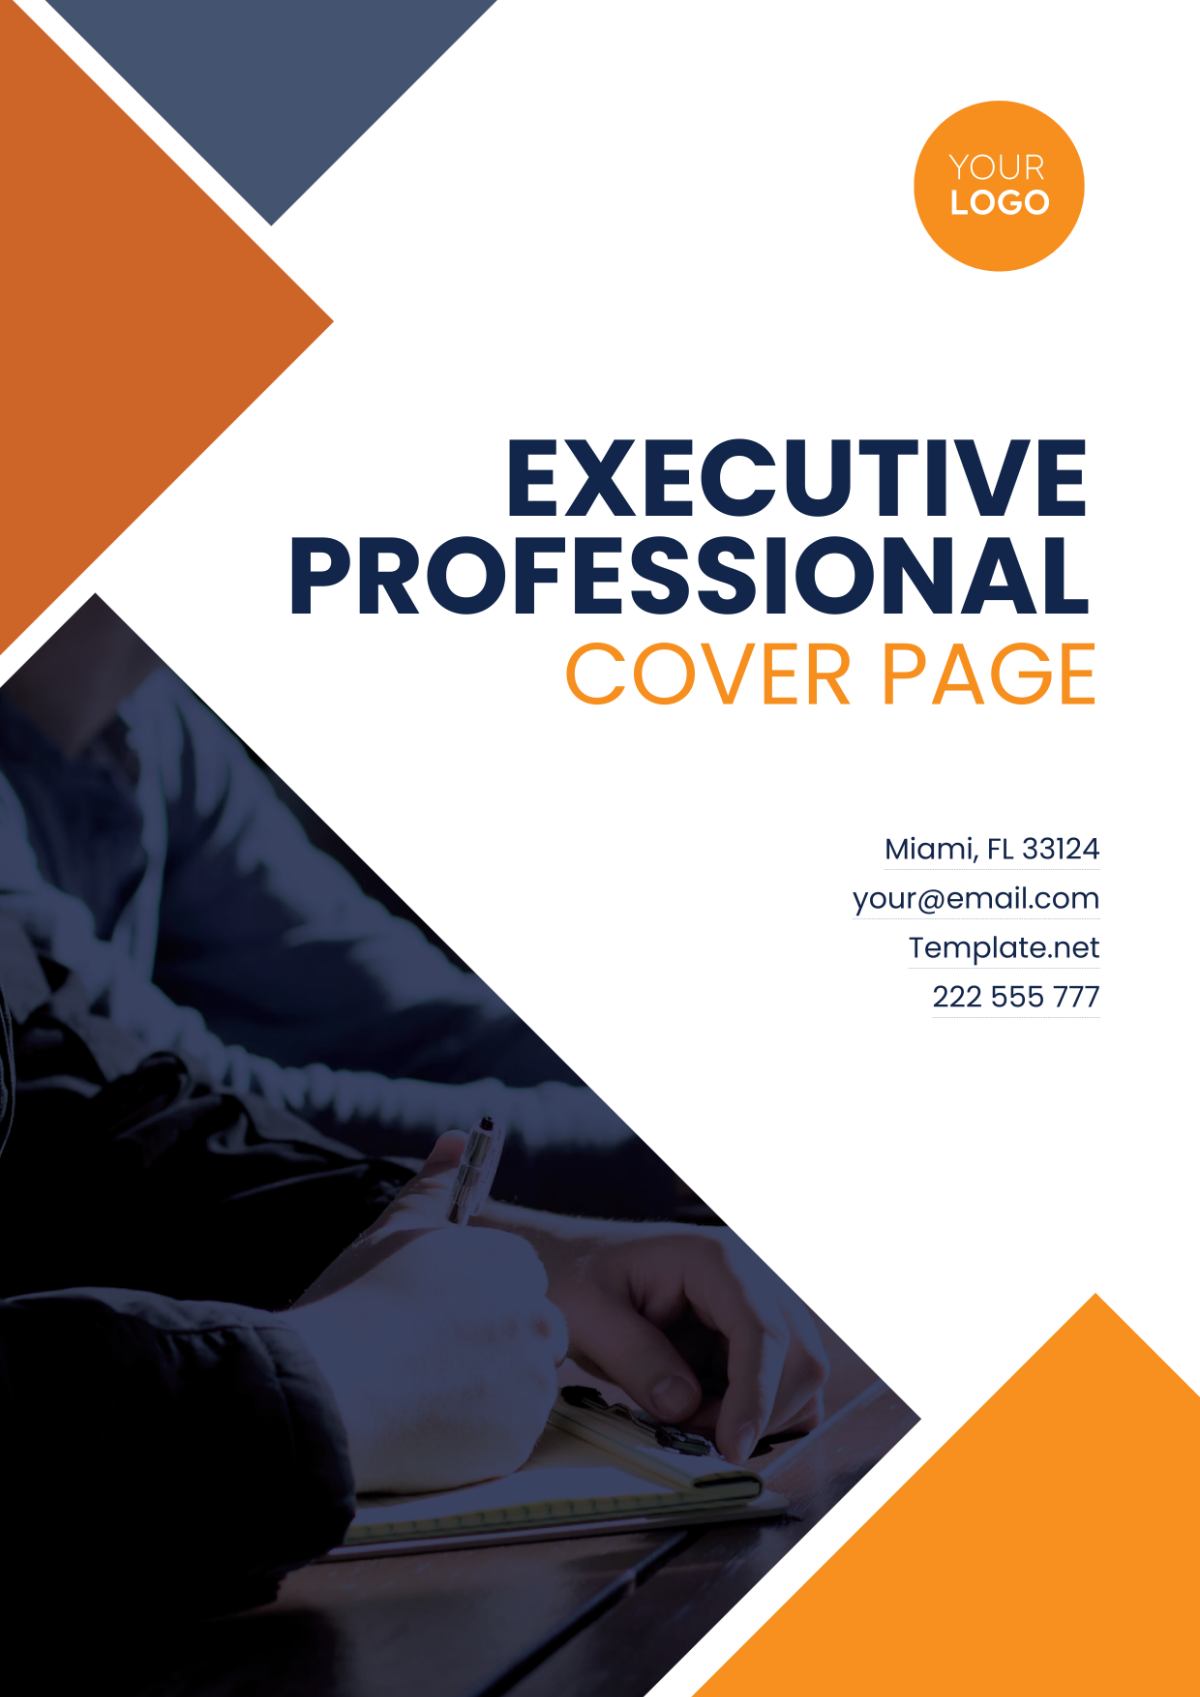 Executive Professional Cover Page Template